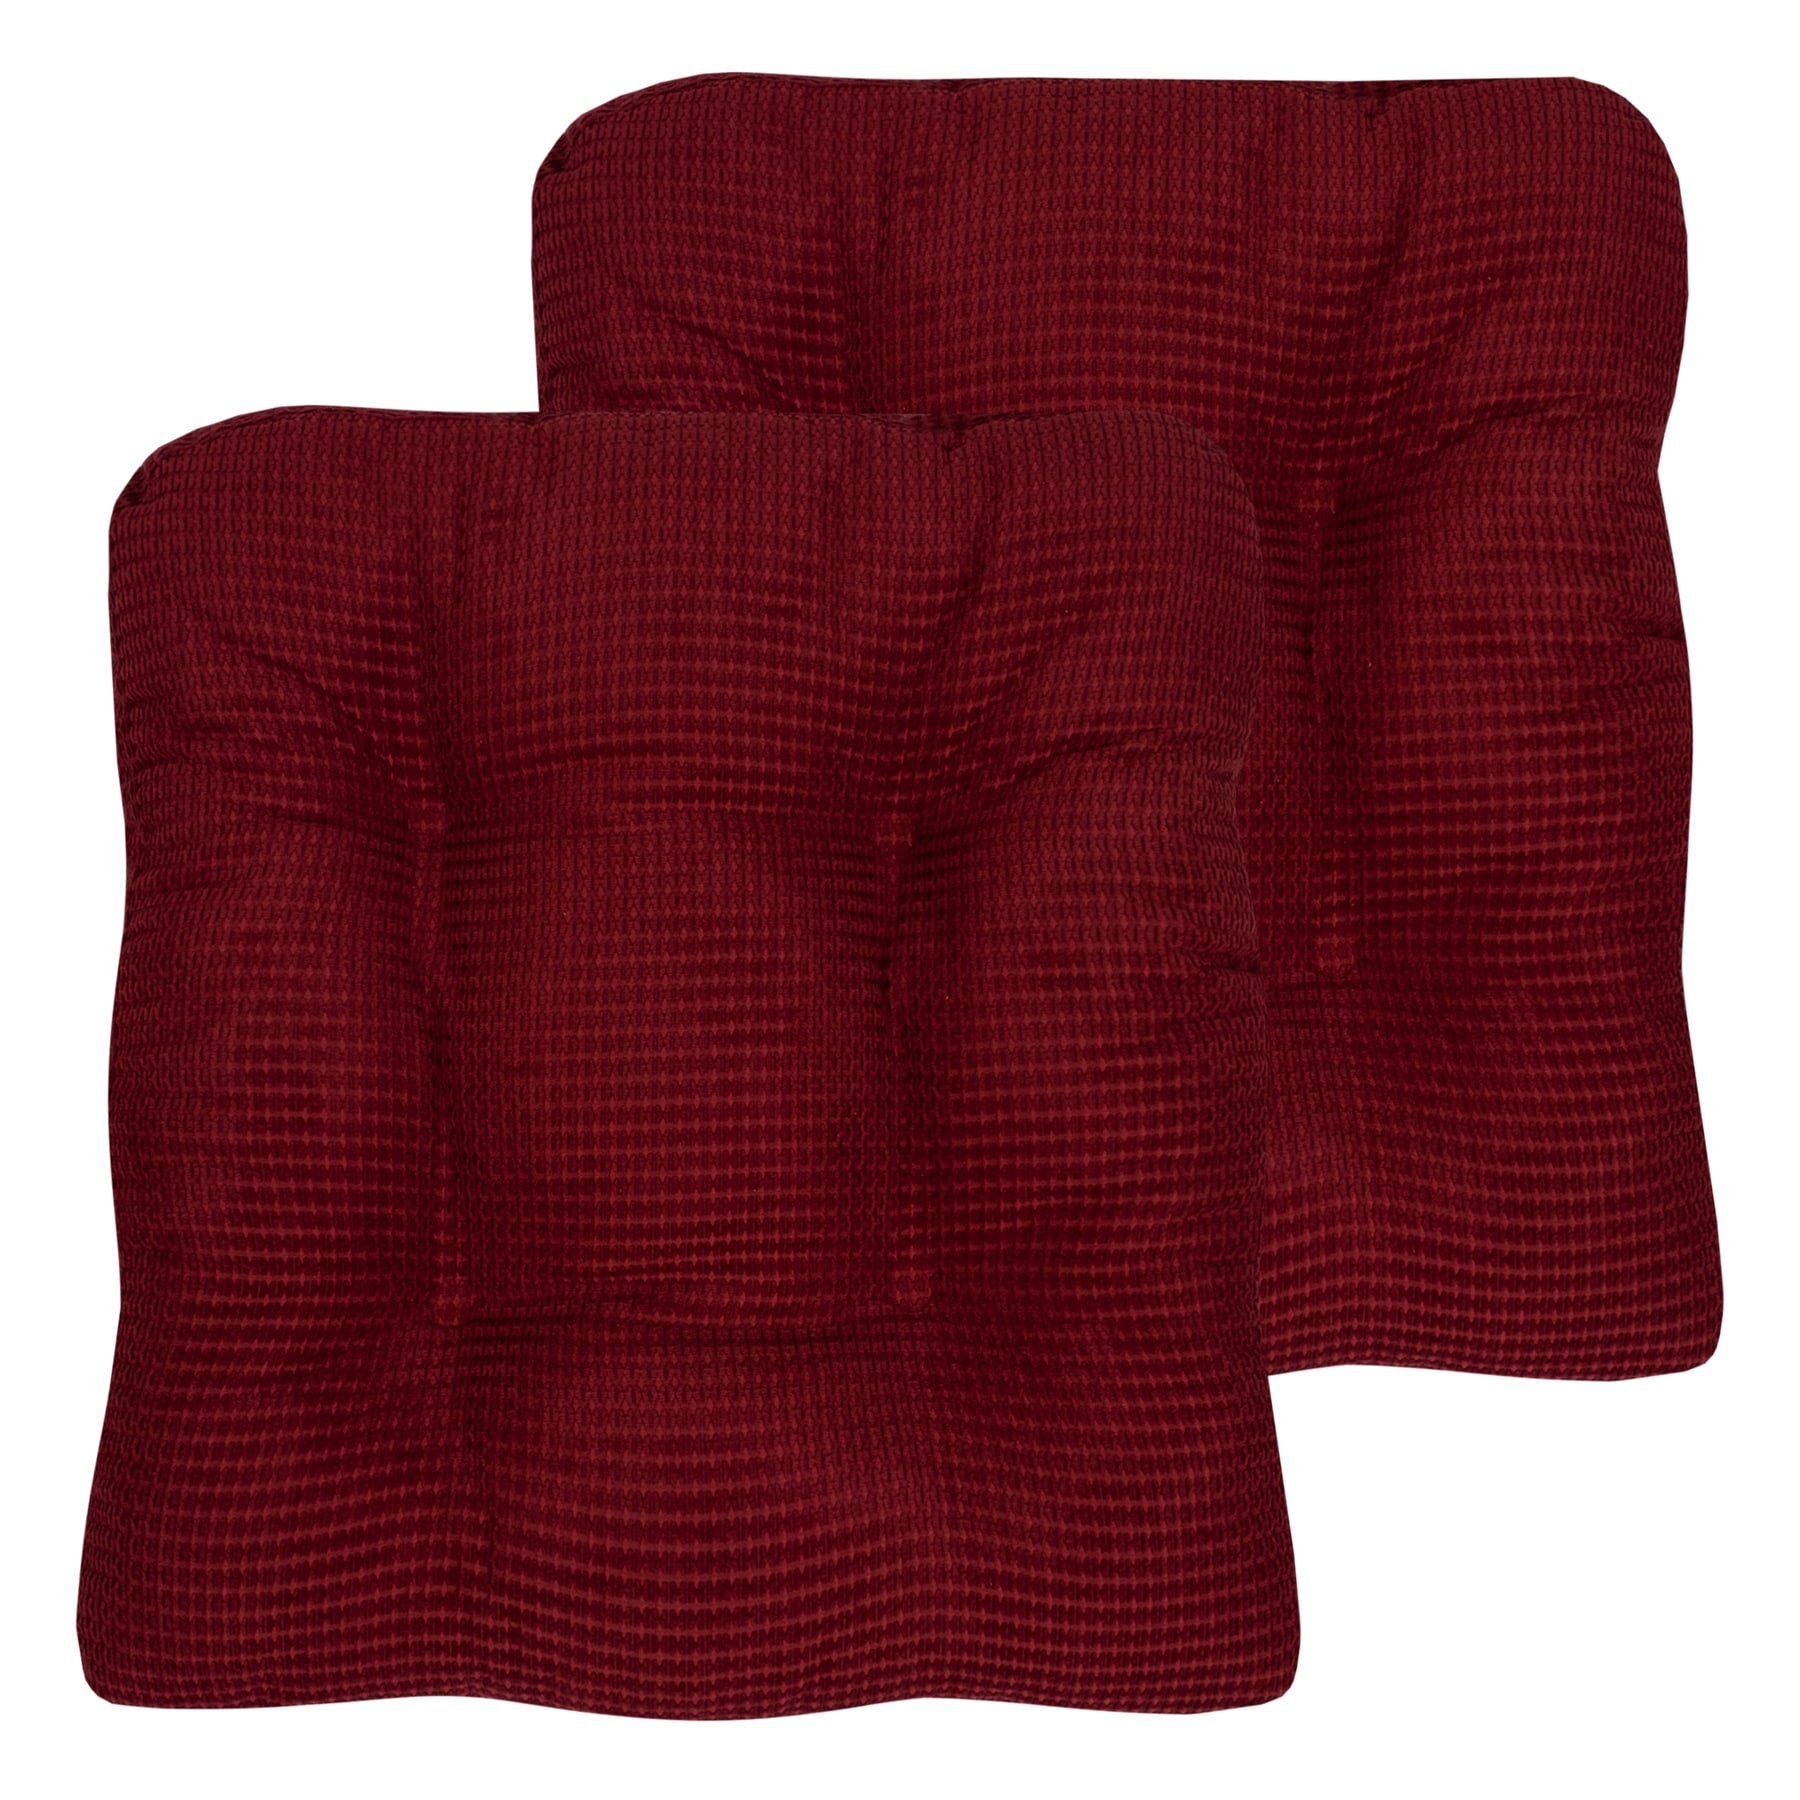 https://ak1.ostkcdn.com/images/products/is/images/direct/587ba298f835a0e949faa68465d7ef017a5149cd/Fluffy-Memory-Foam-Non-Slip-Chair-Pad.jpg